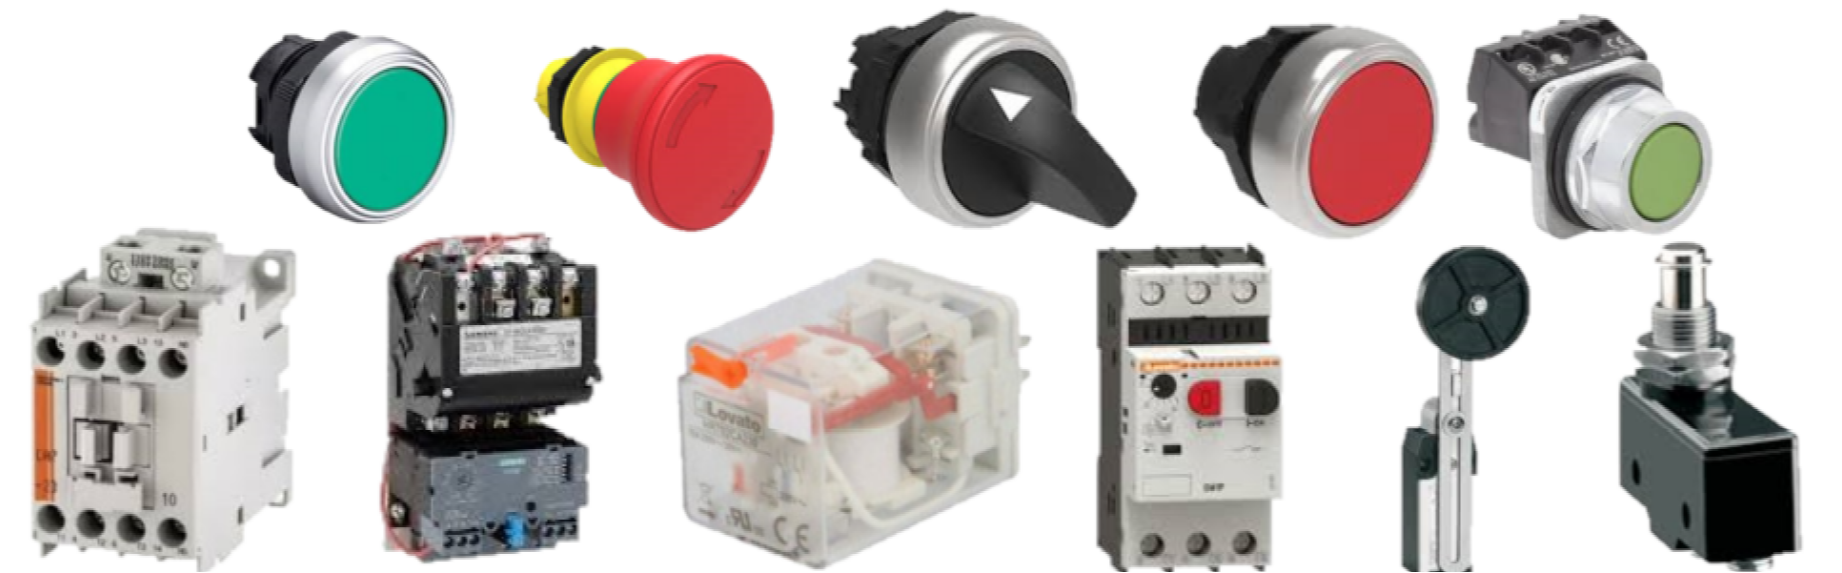 A banner of different types of pushbuttons, contactors, and limit switches